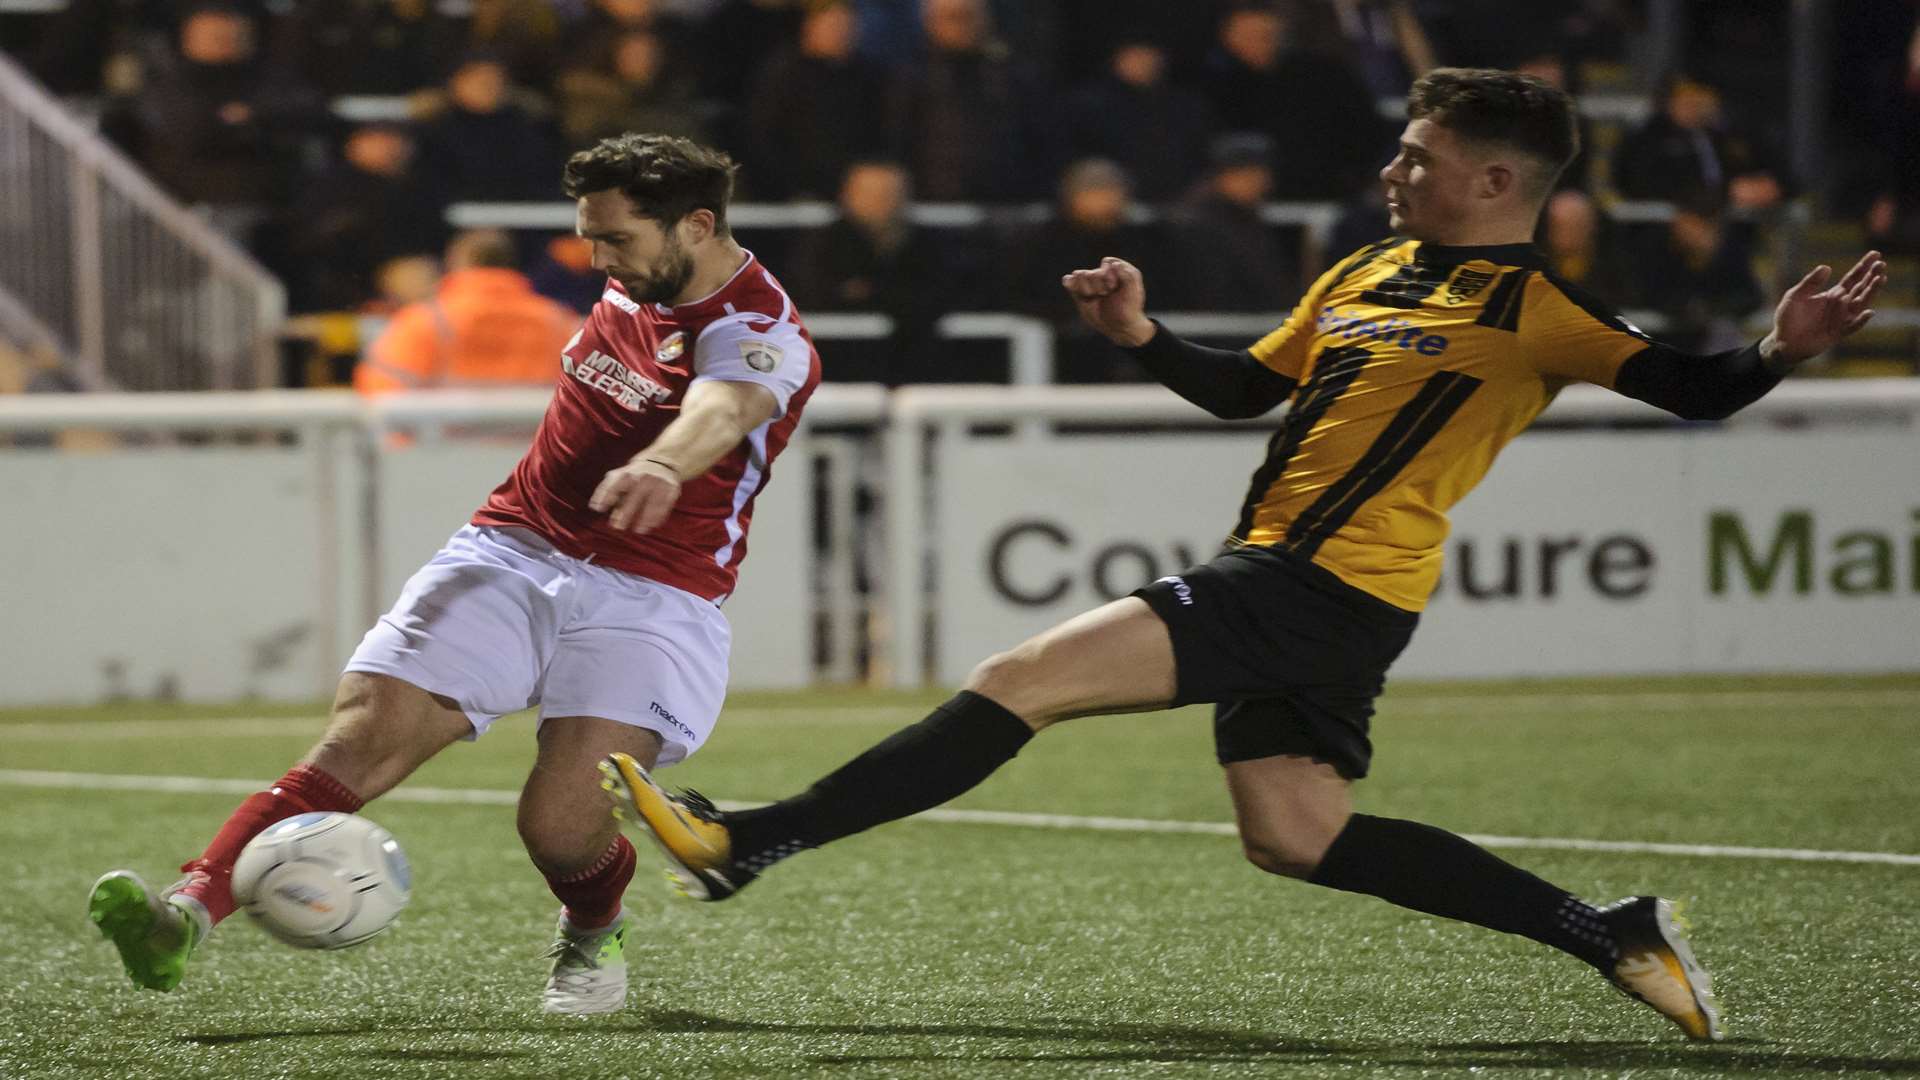 Dean Rance clears the ball during Ebbsfleet's win at Maidstone Picture: Andy Payton